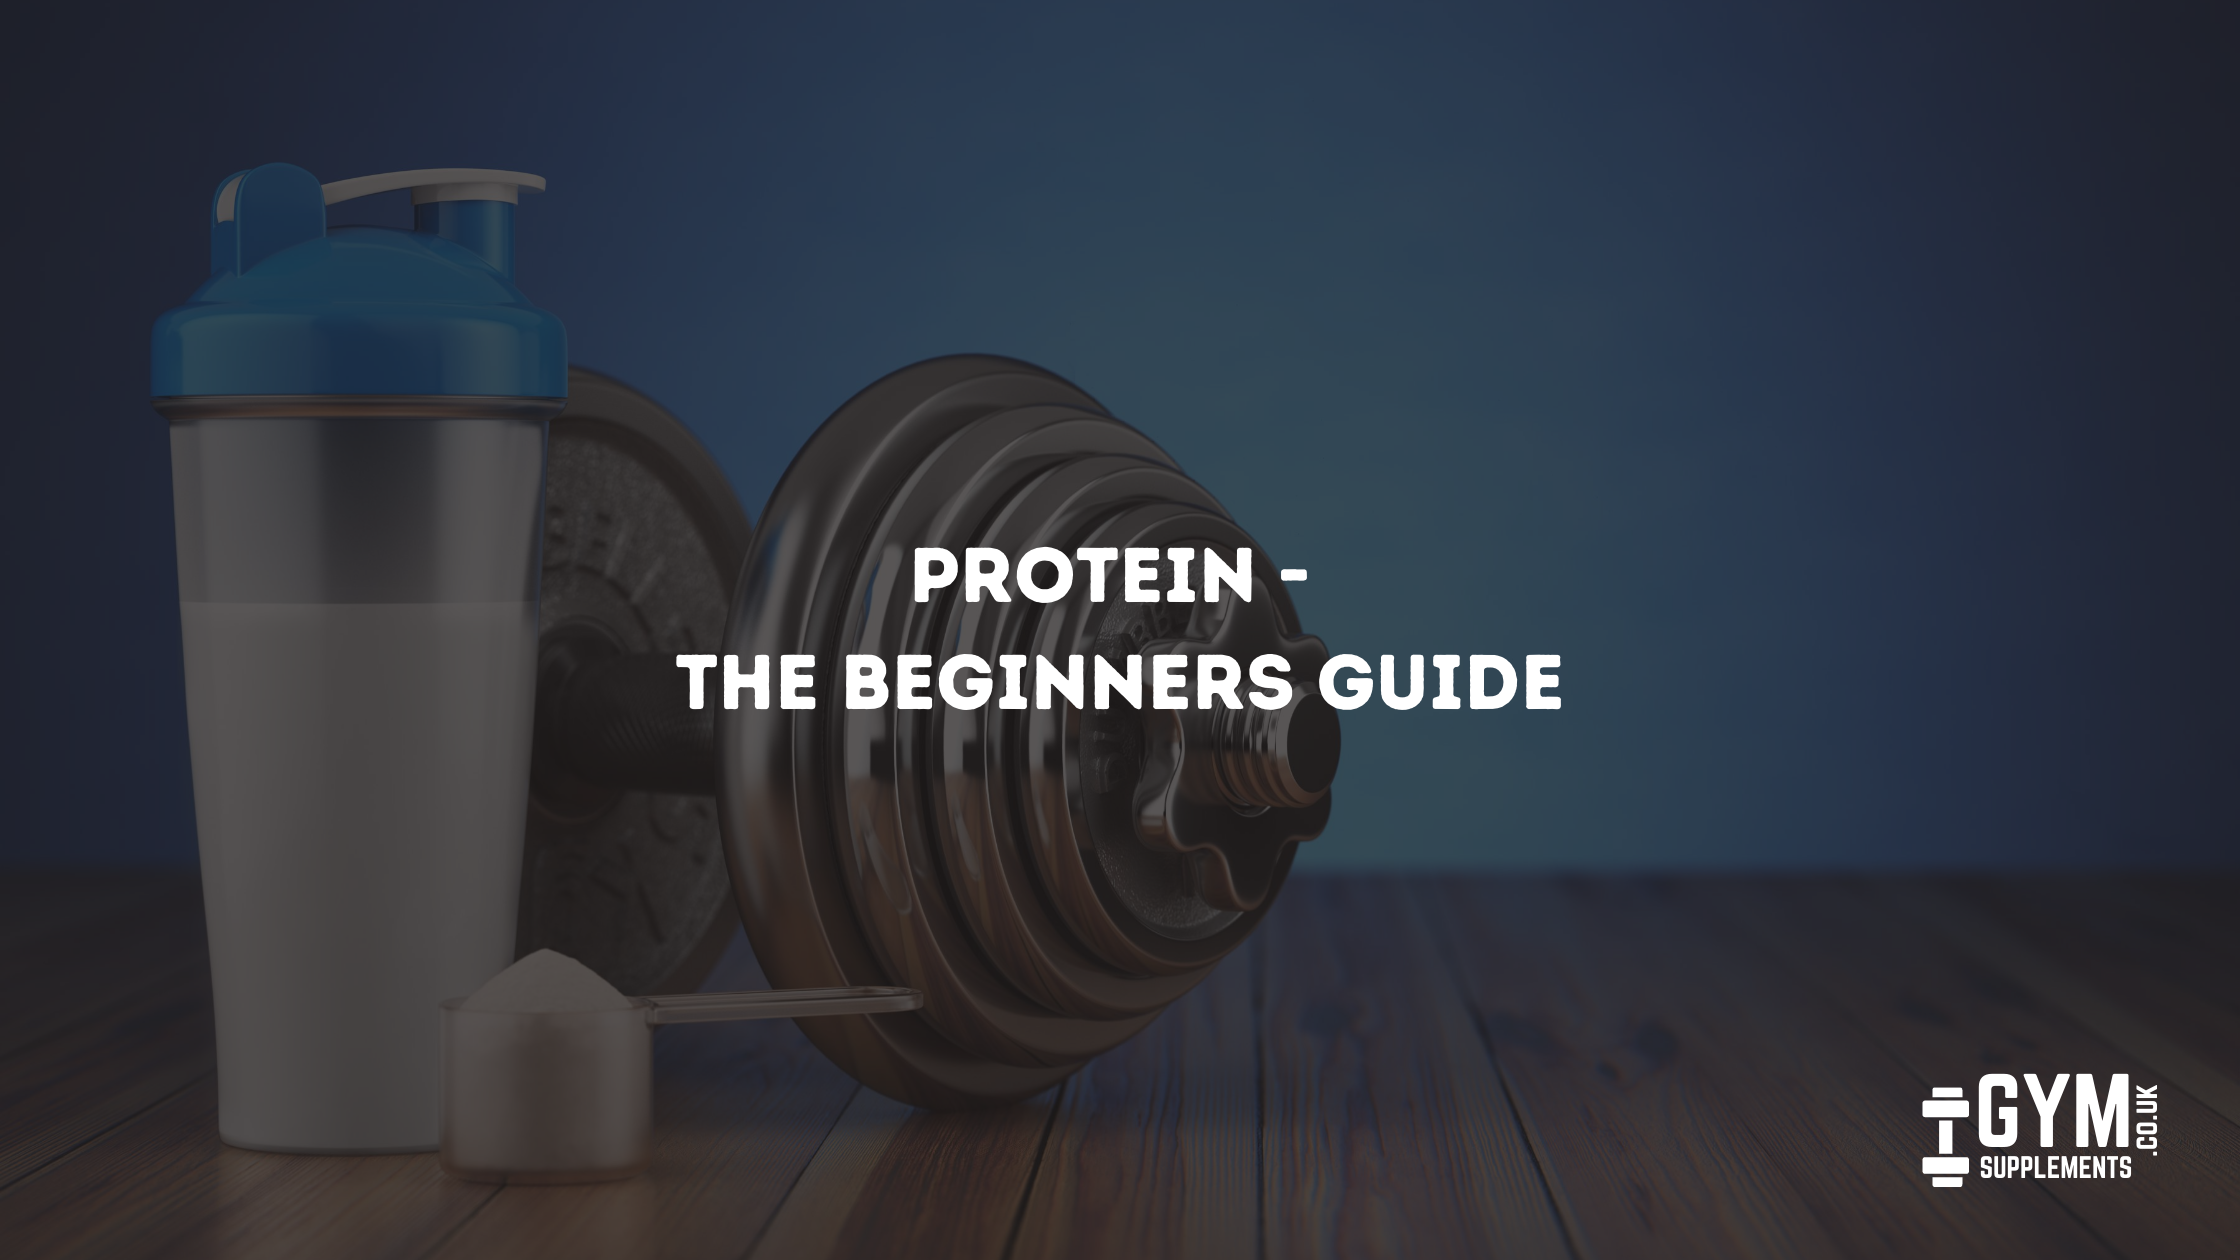 All About Protein - The Beginners Guide